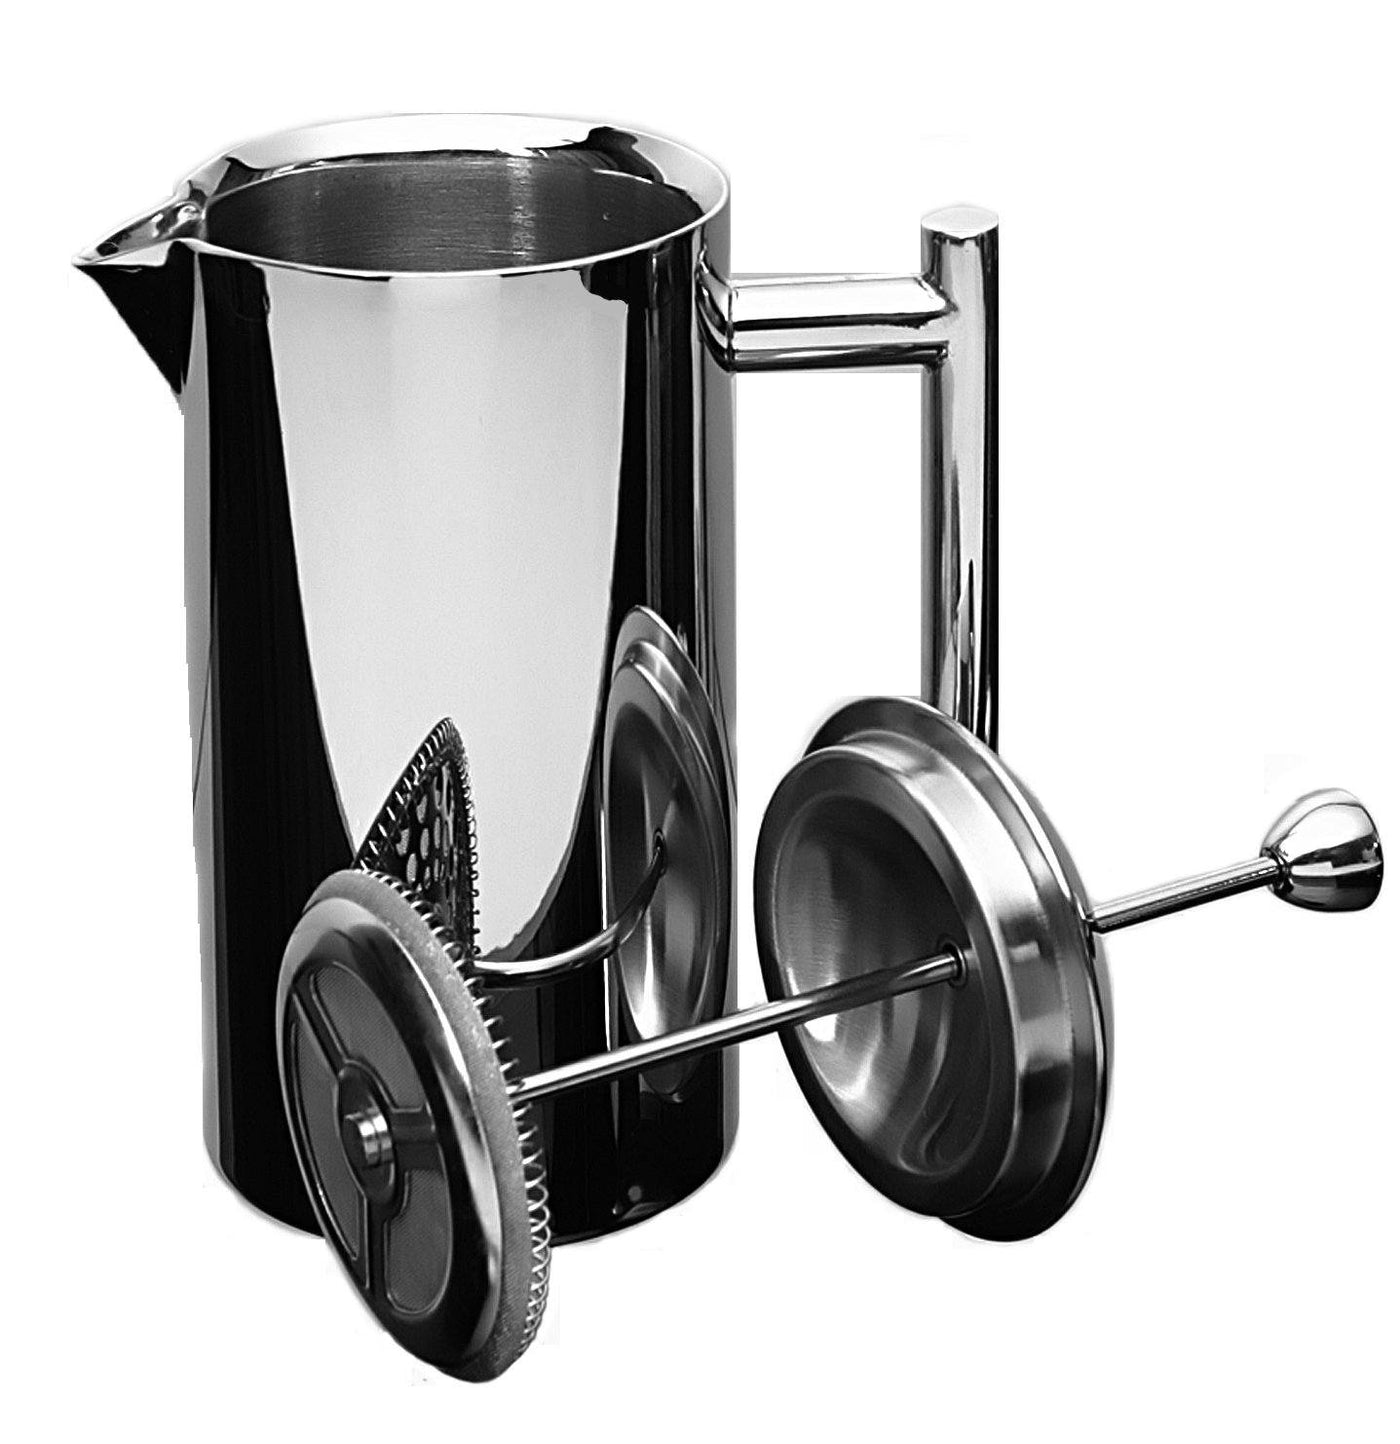 Frieling Brushed Stainless Steel French Press 36 ounce — Beacon Coffee